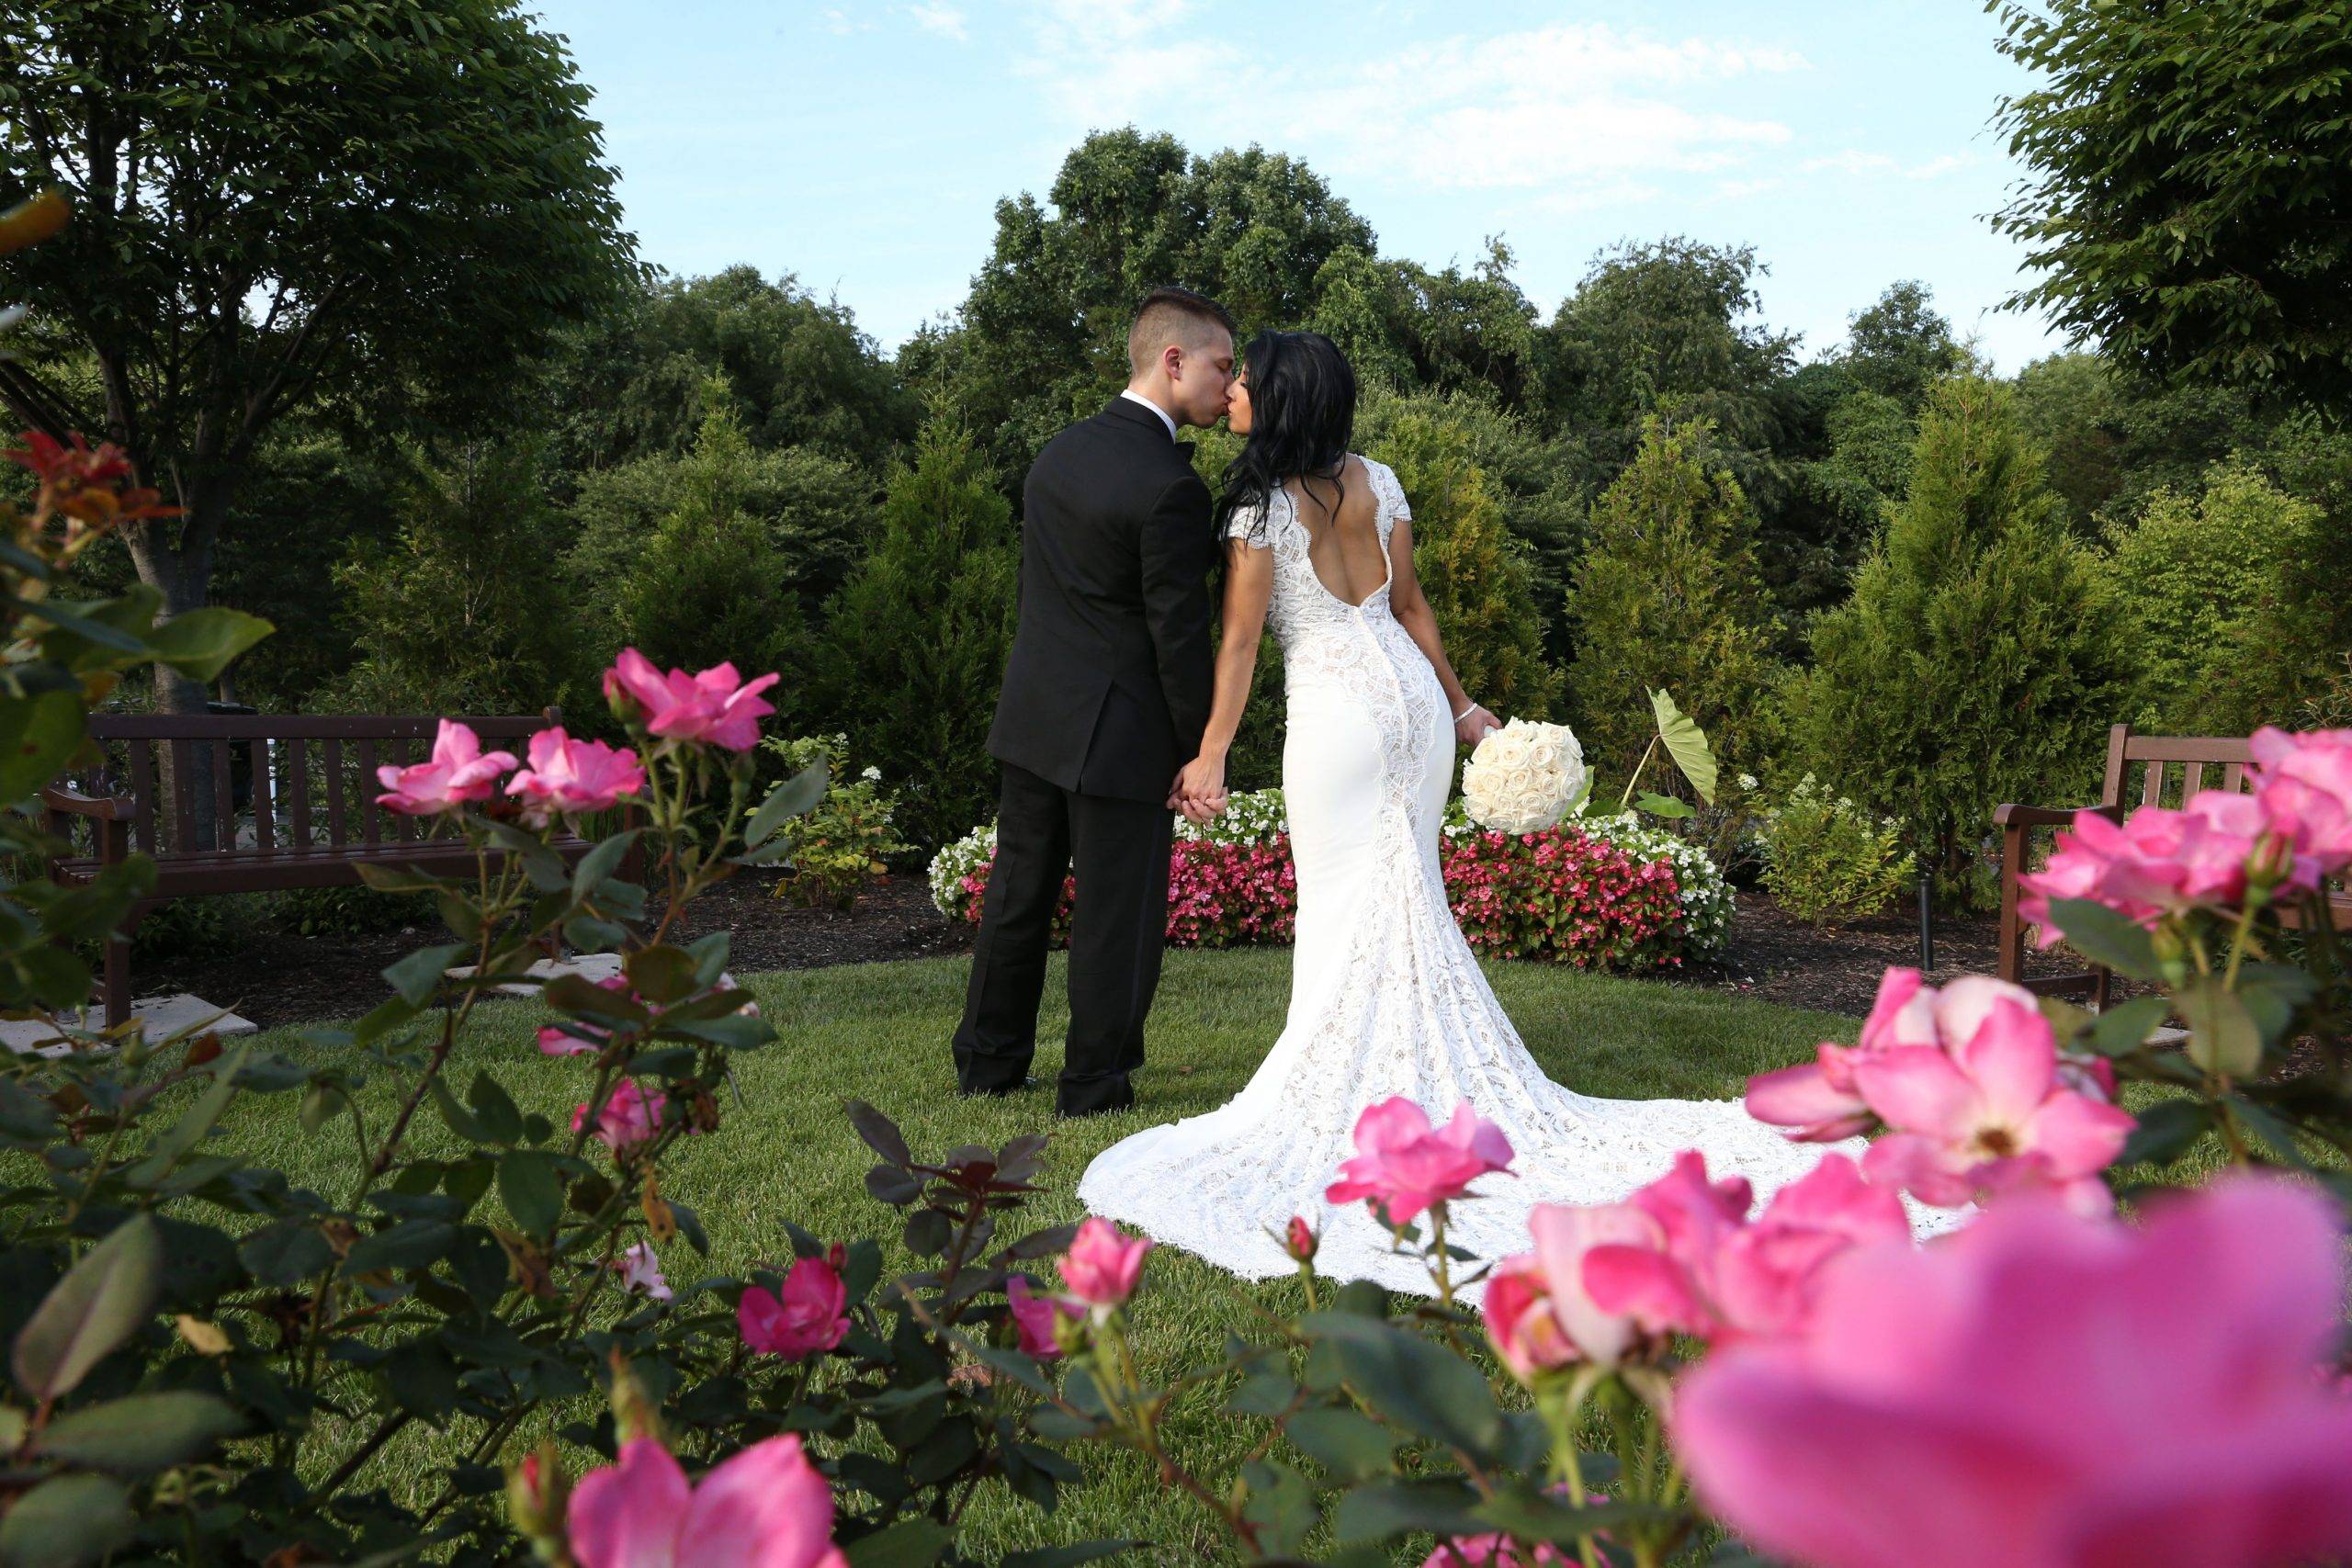 A bride and groom kissing in front of pink flowers.